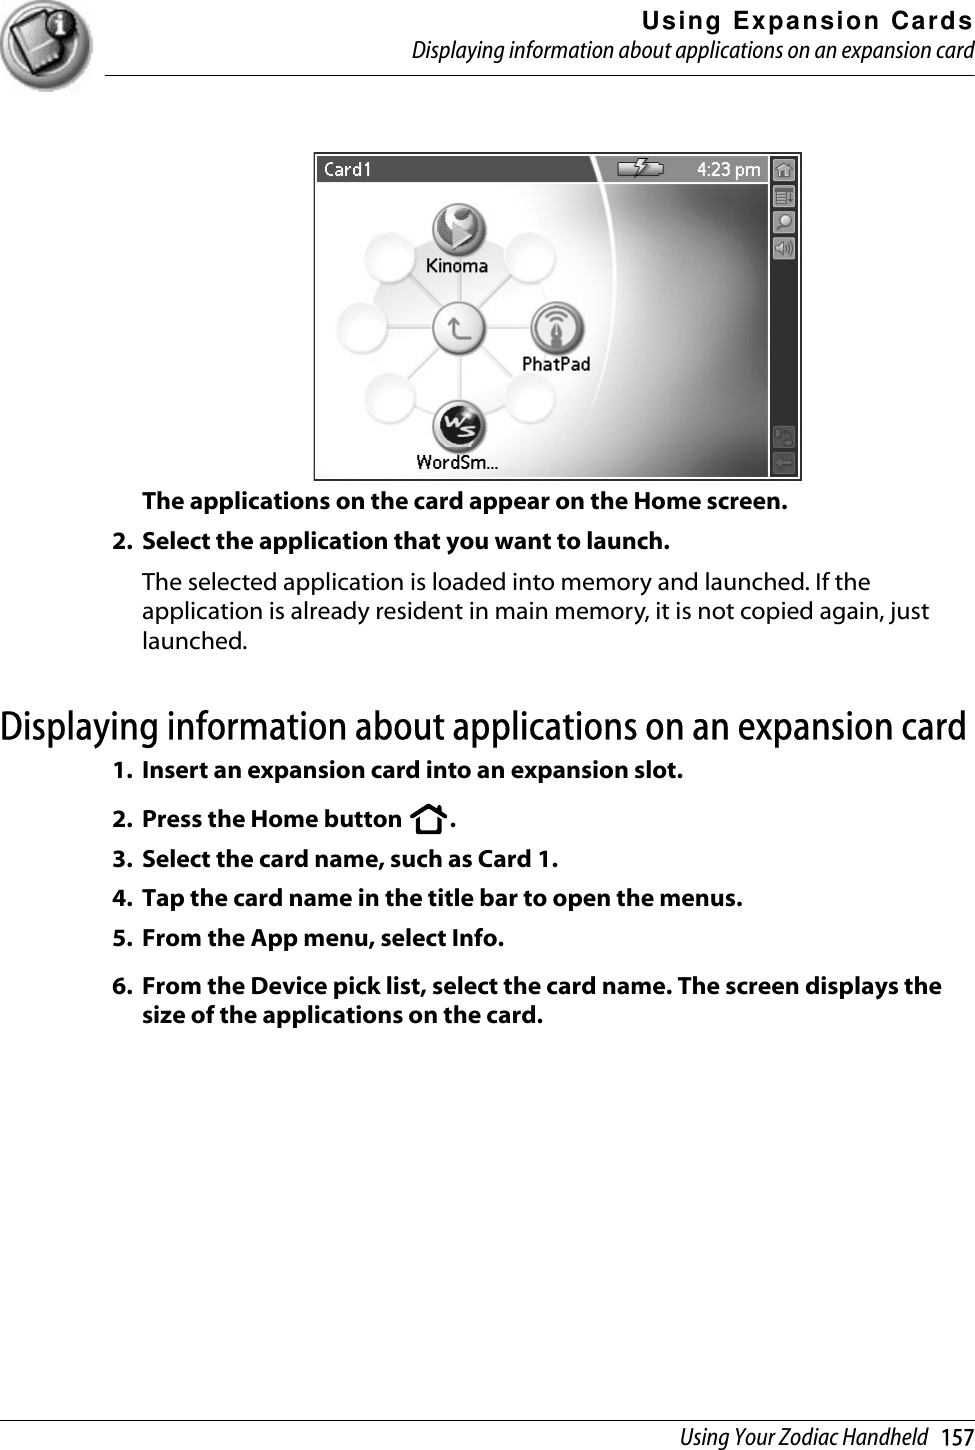 Using Expansion CardsDisplaying information about applications on an expansion cardUsing Your Zodiac Handheld   157The applications on the card appear on the Home screen. 2. Select the application that you want to launch.The selected application is loaded into memory and launched. If the application is already resident in main memory, it is not copied again, just launched.Displaying information about applications on an expansion card 1. Insert an expansion card into an expansion slot.2. Press the Home button  .3. Select the card name, such as Card 1.4. Tap the card name in the title bar to open the menus. 5. From the App menu, select Info.6. From the Device pick list, select the card name. The screen displays the size of the applications on the card.